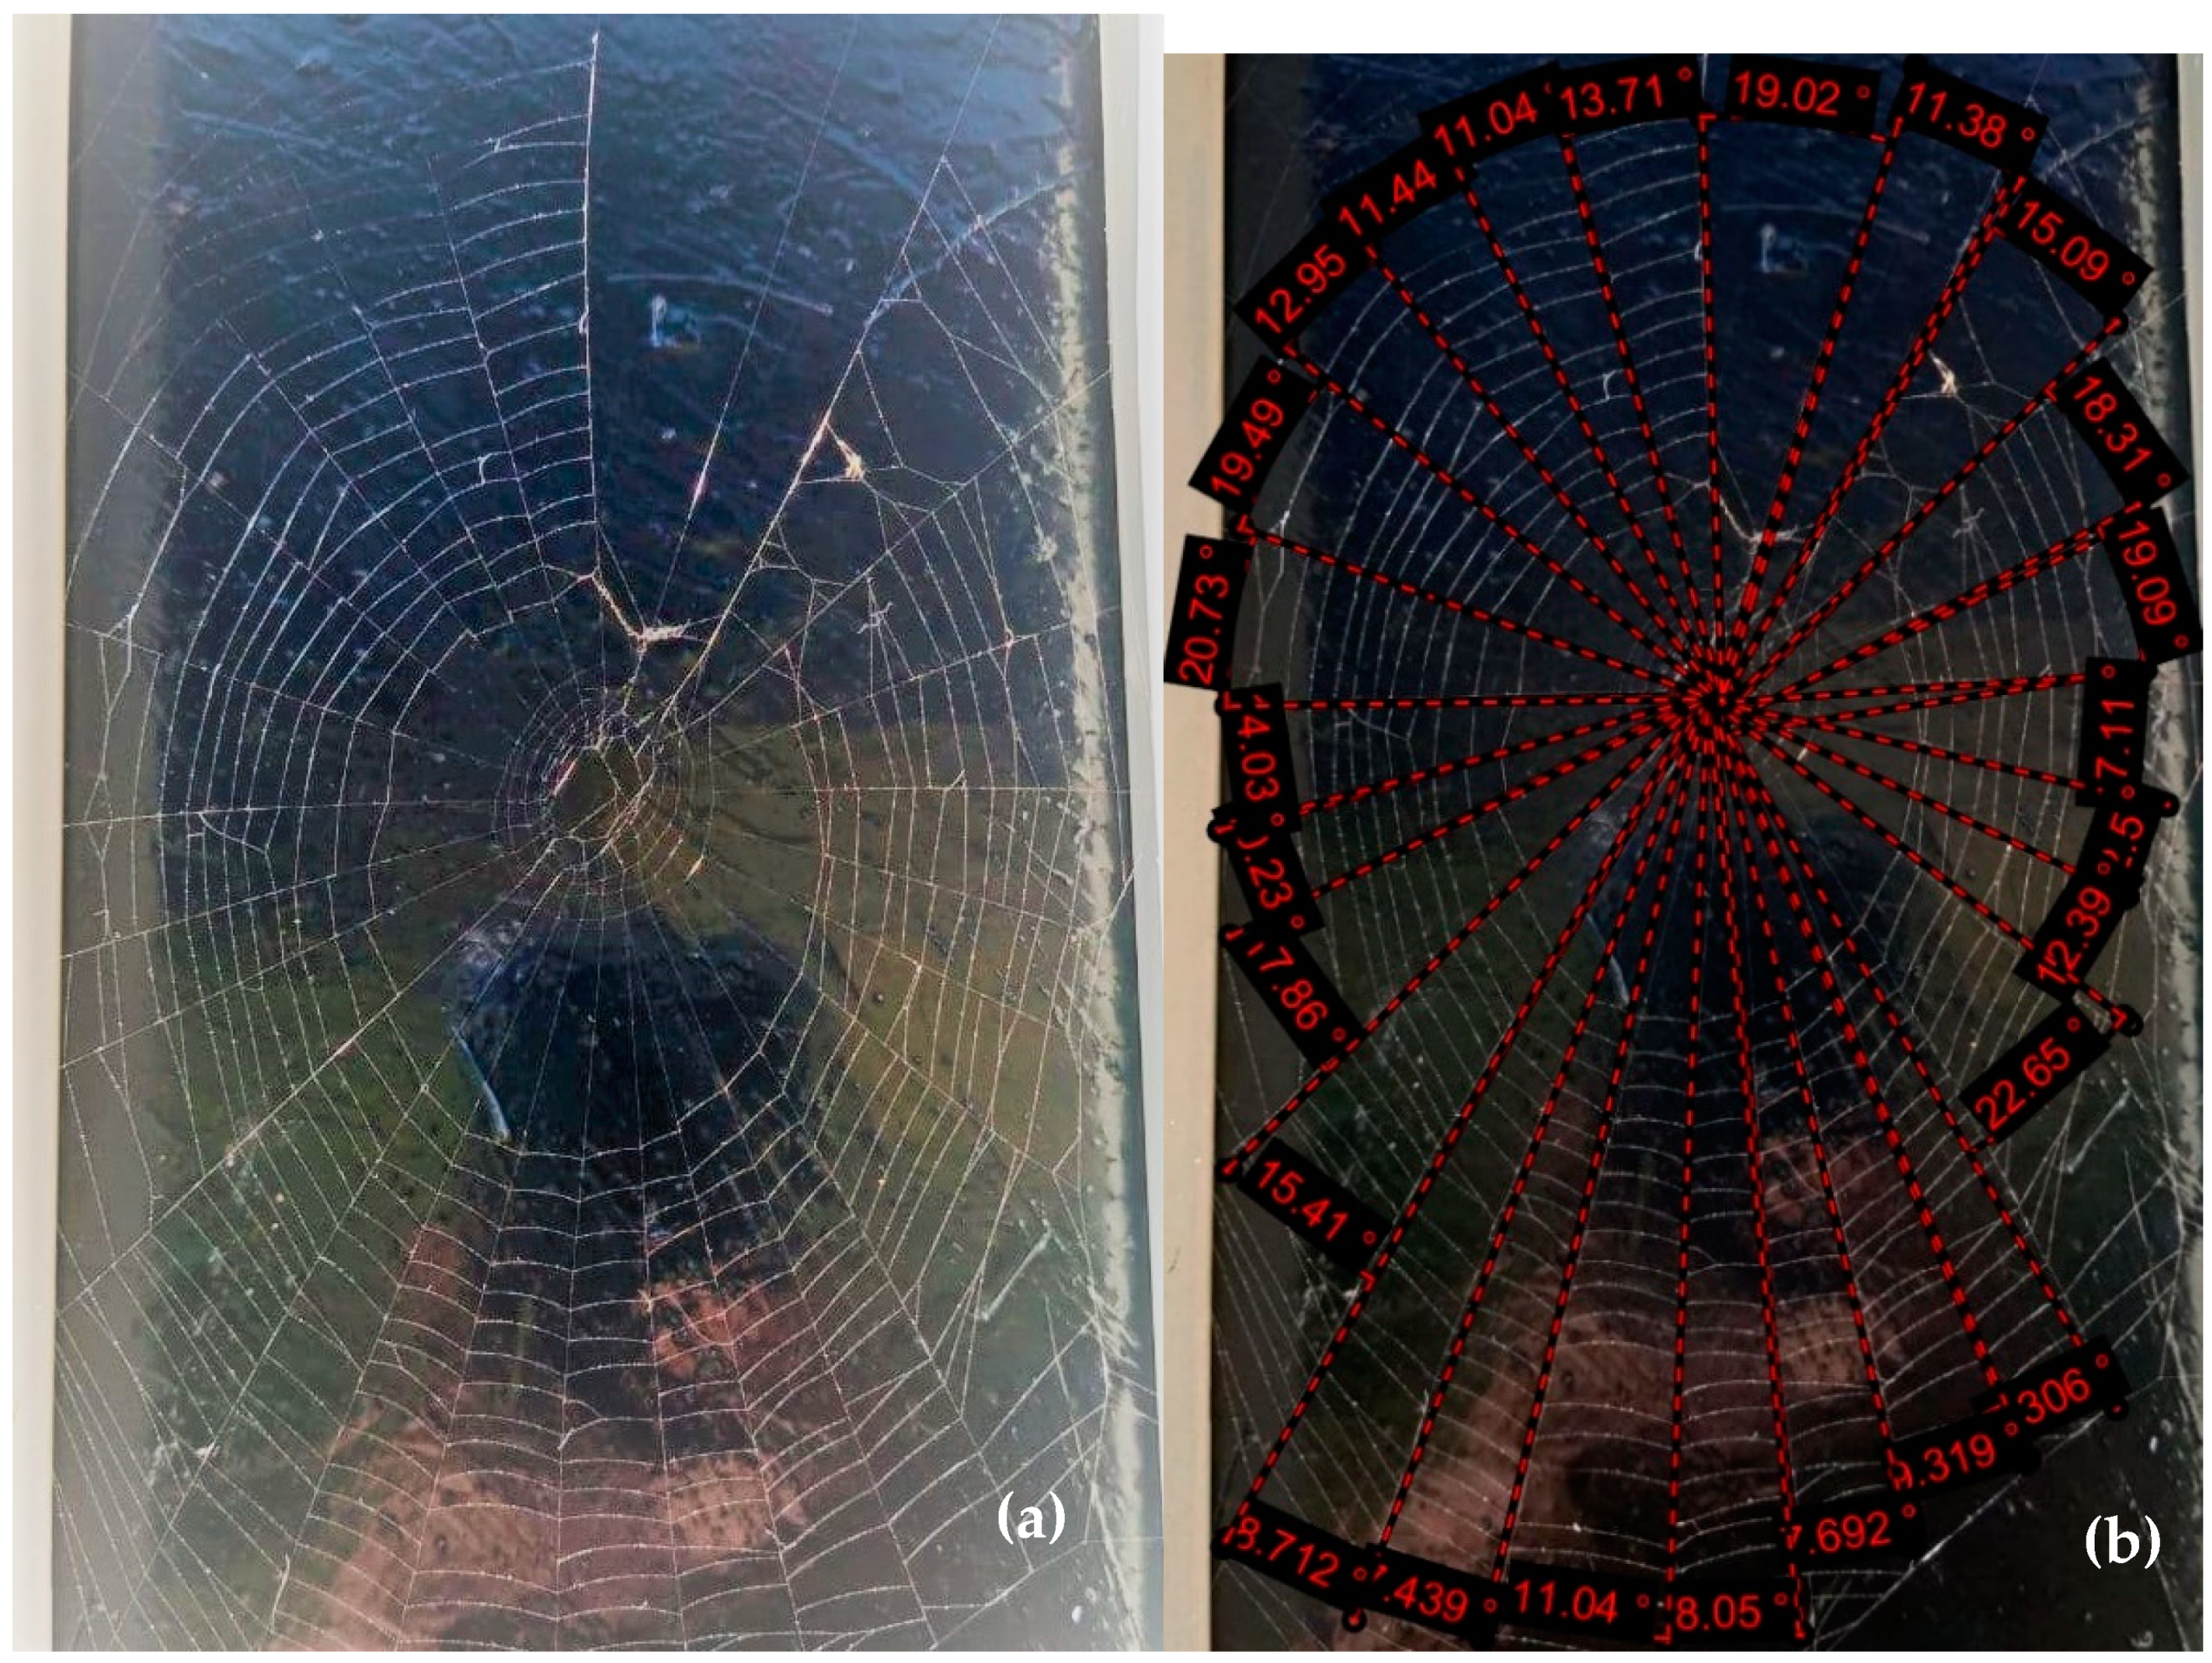 View Of A Spider Web At A Side Angle - Spider Web With Colored